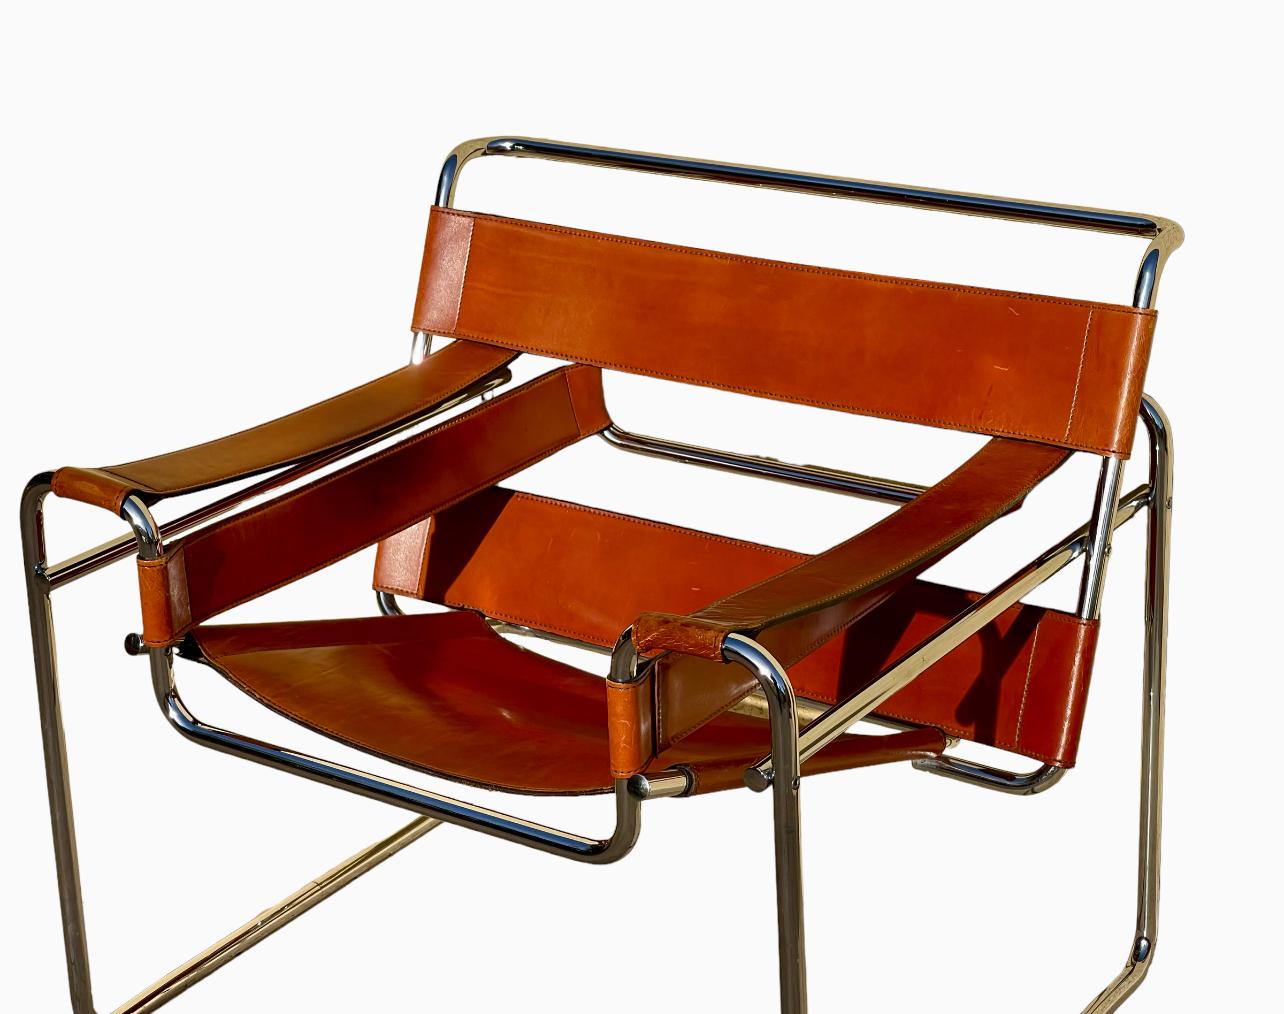 Superb Wassily chair with original cognac leather and tubular structure in folded and chromed metal. This chair is a reissue around 1970. It is in very good condition, no stains or oxidation.

The Wassily chair, also known as the Model B3 chair, was